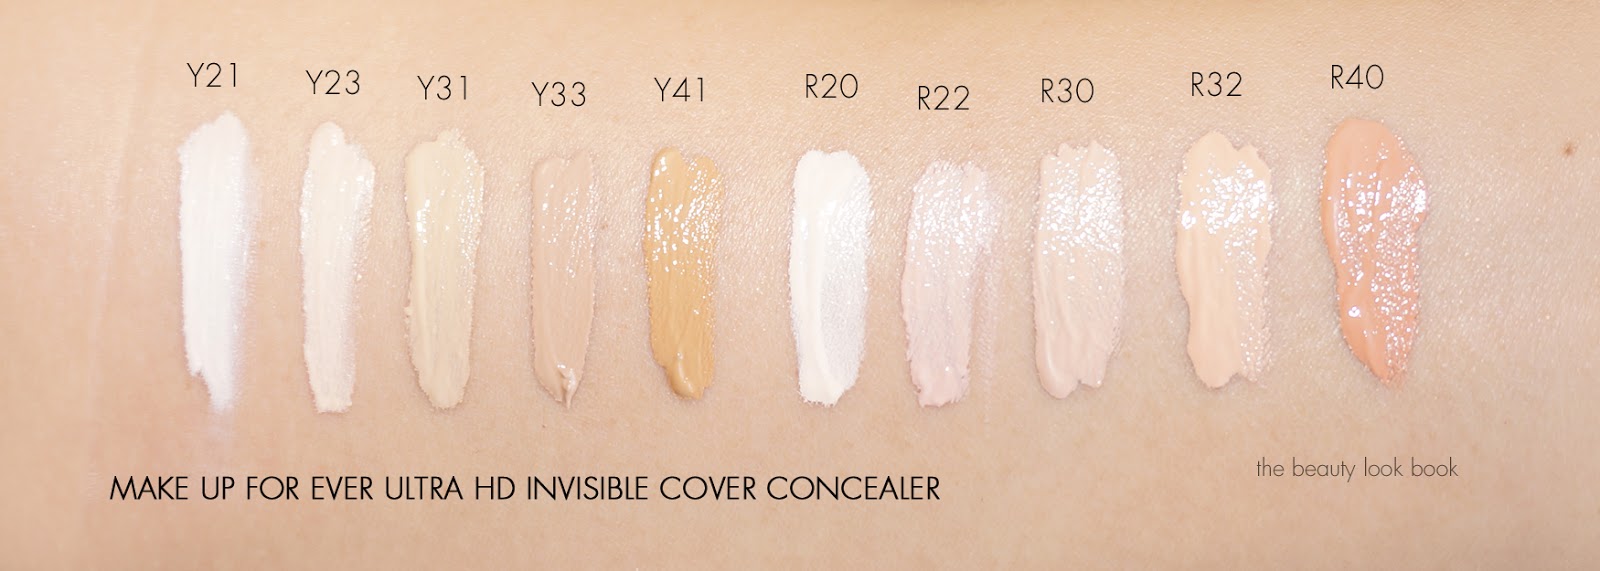 Make Up For Ever Ultra HD Concealer - The Beauty Look Book